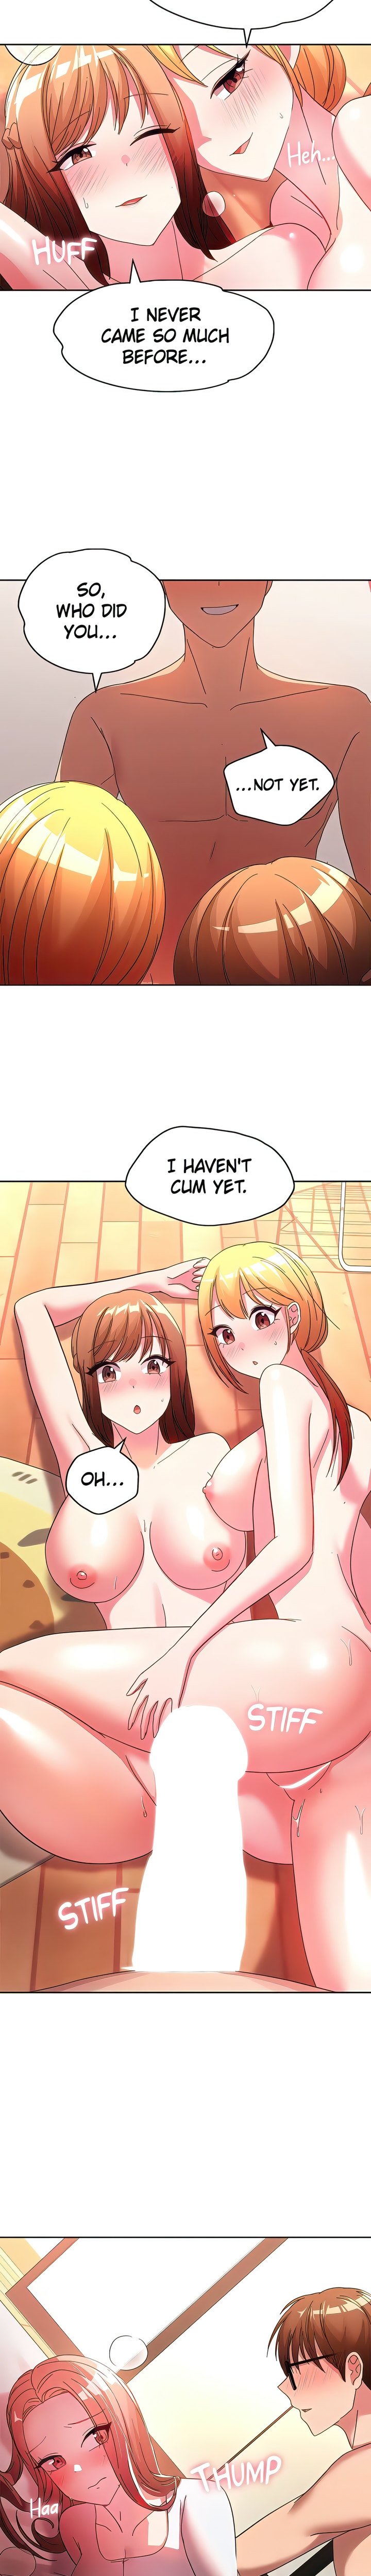 girls-i-used-to-teach-chap-33-18